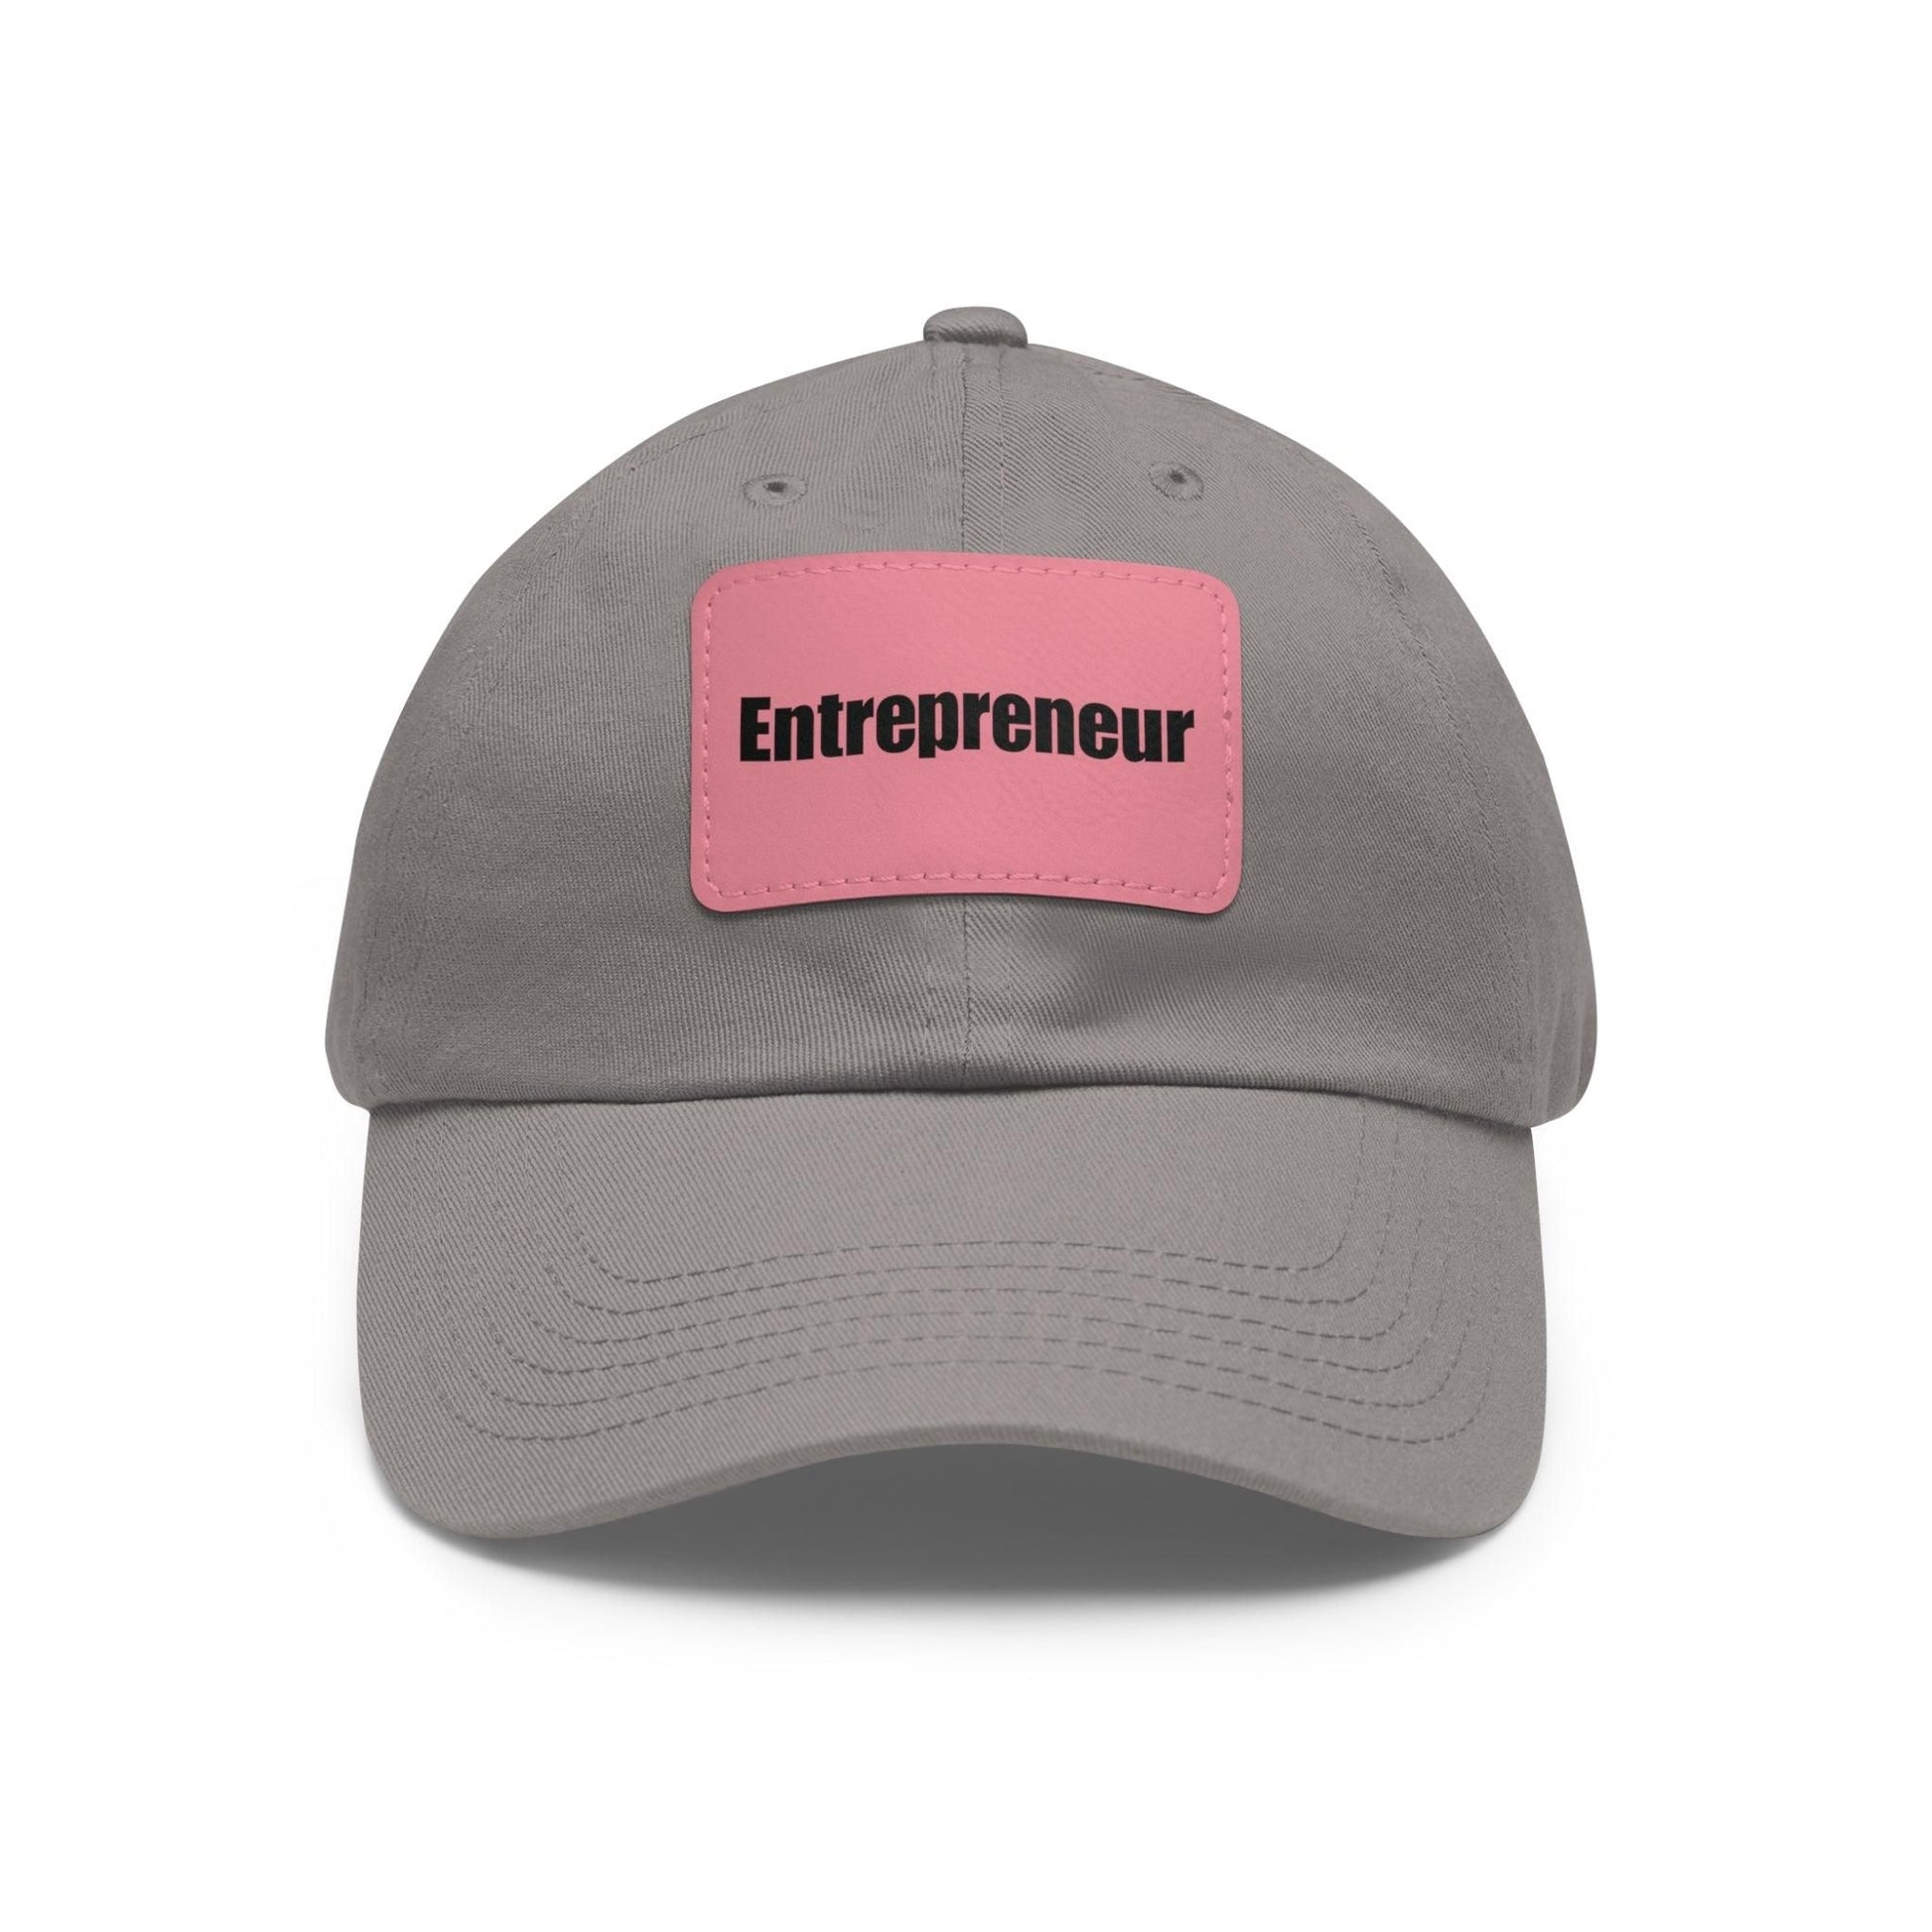 Entrepreneur Baseball Hat with Leather Patch Cap Grey / Pink patch Rectangle One size